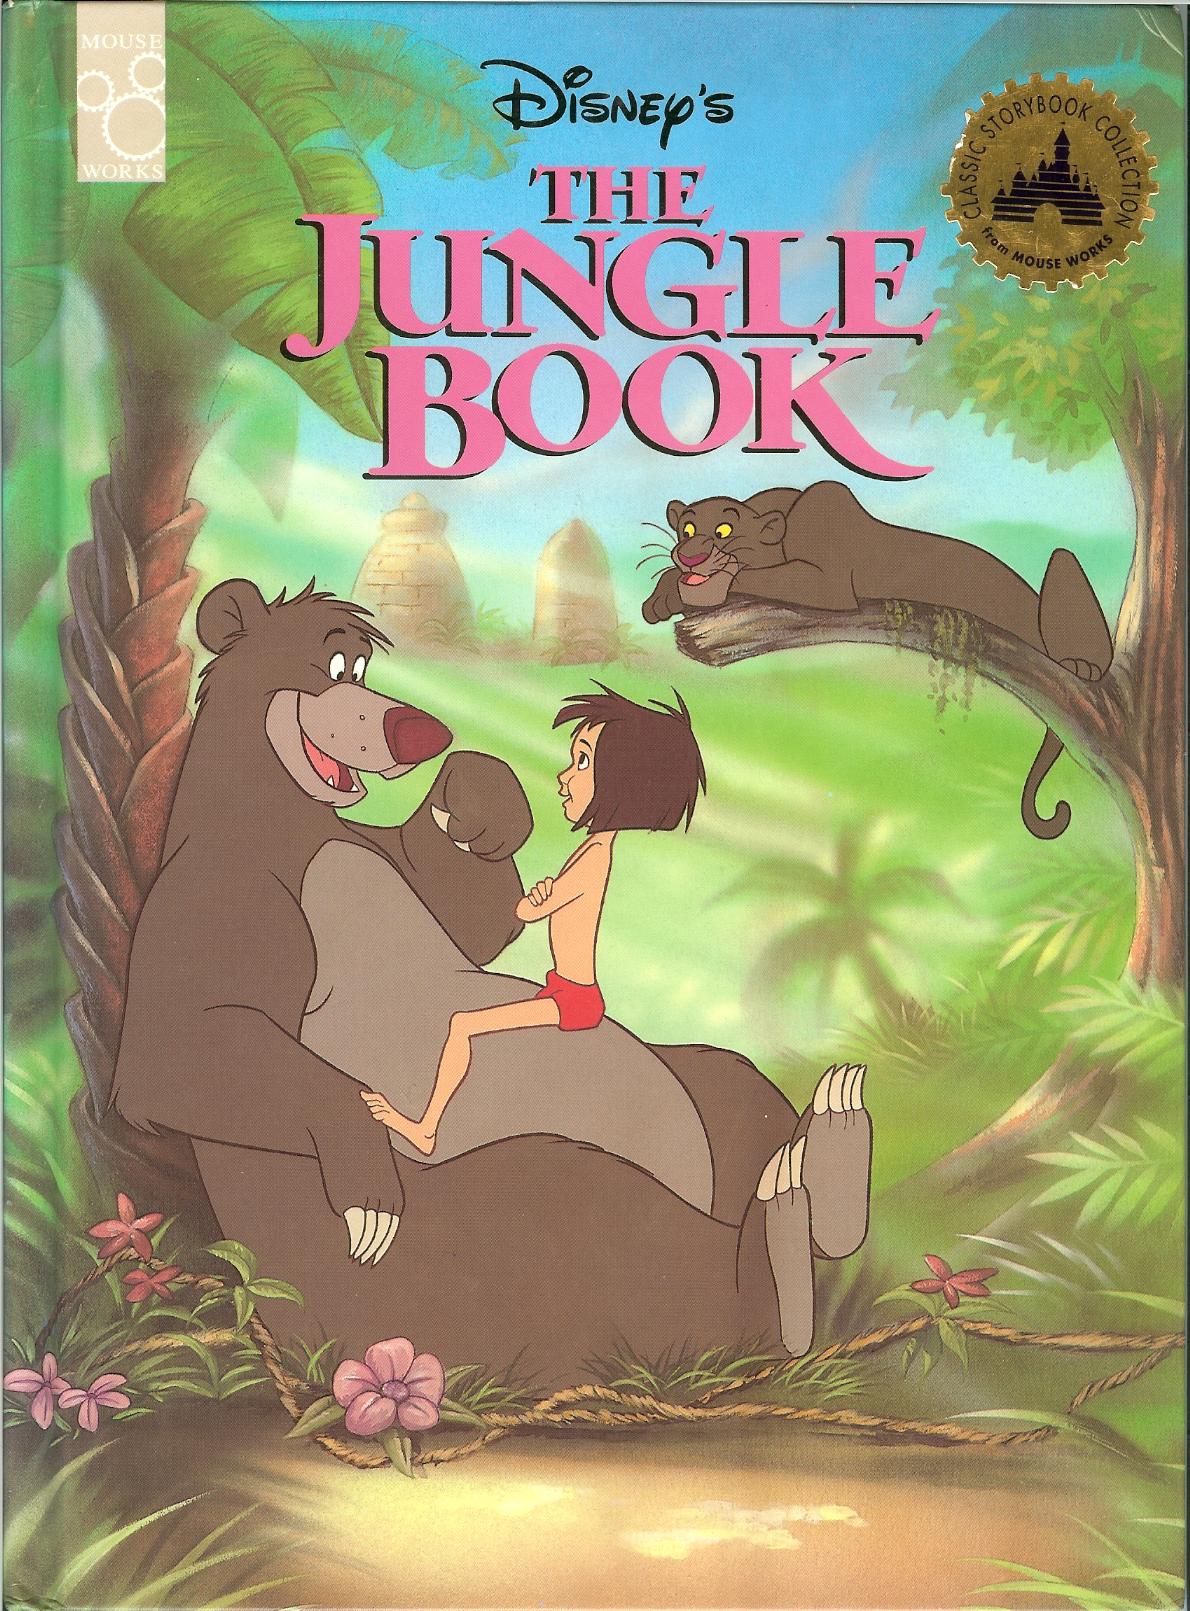 download the new version for ipod The Jungle Book